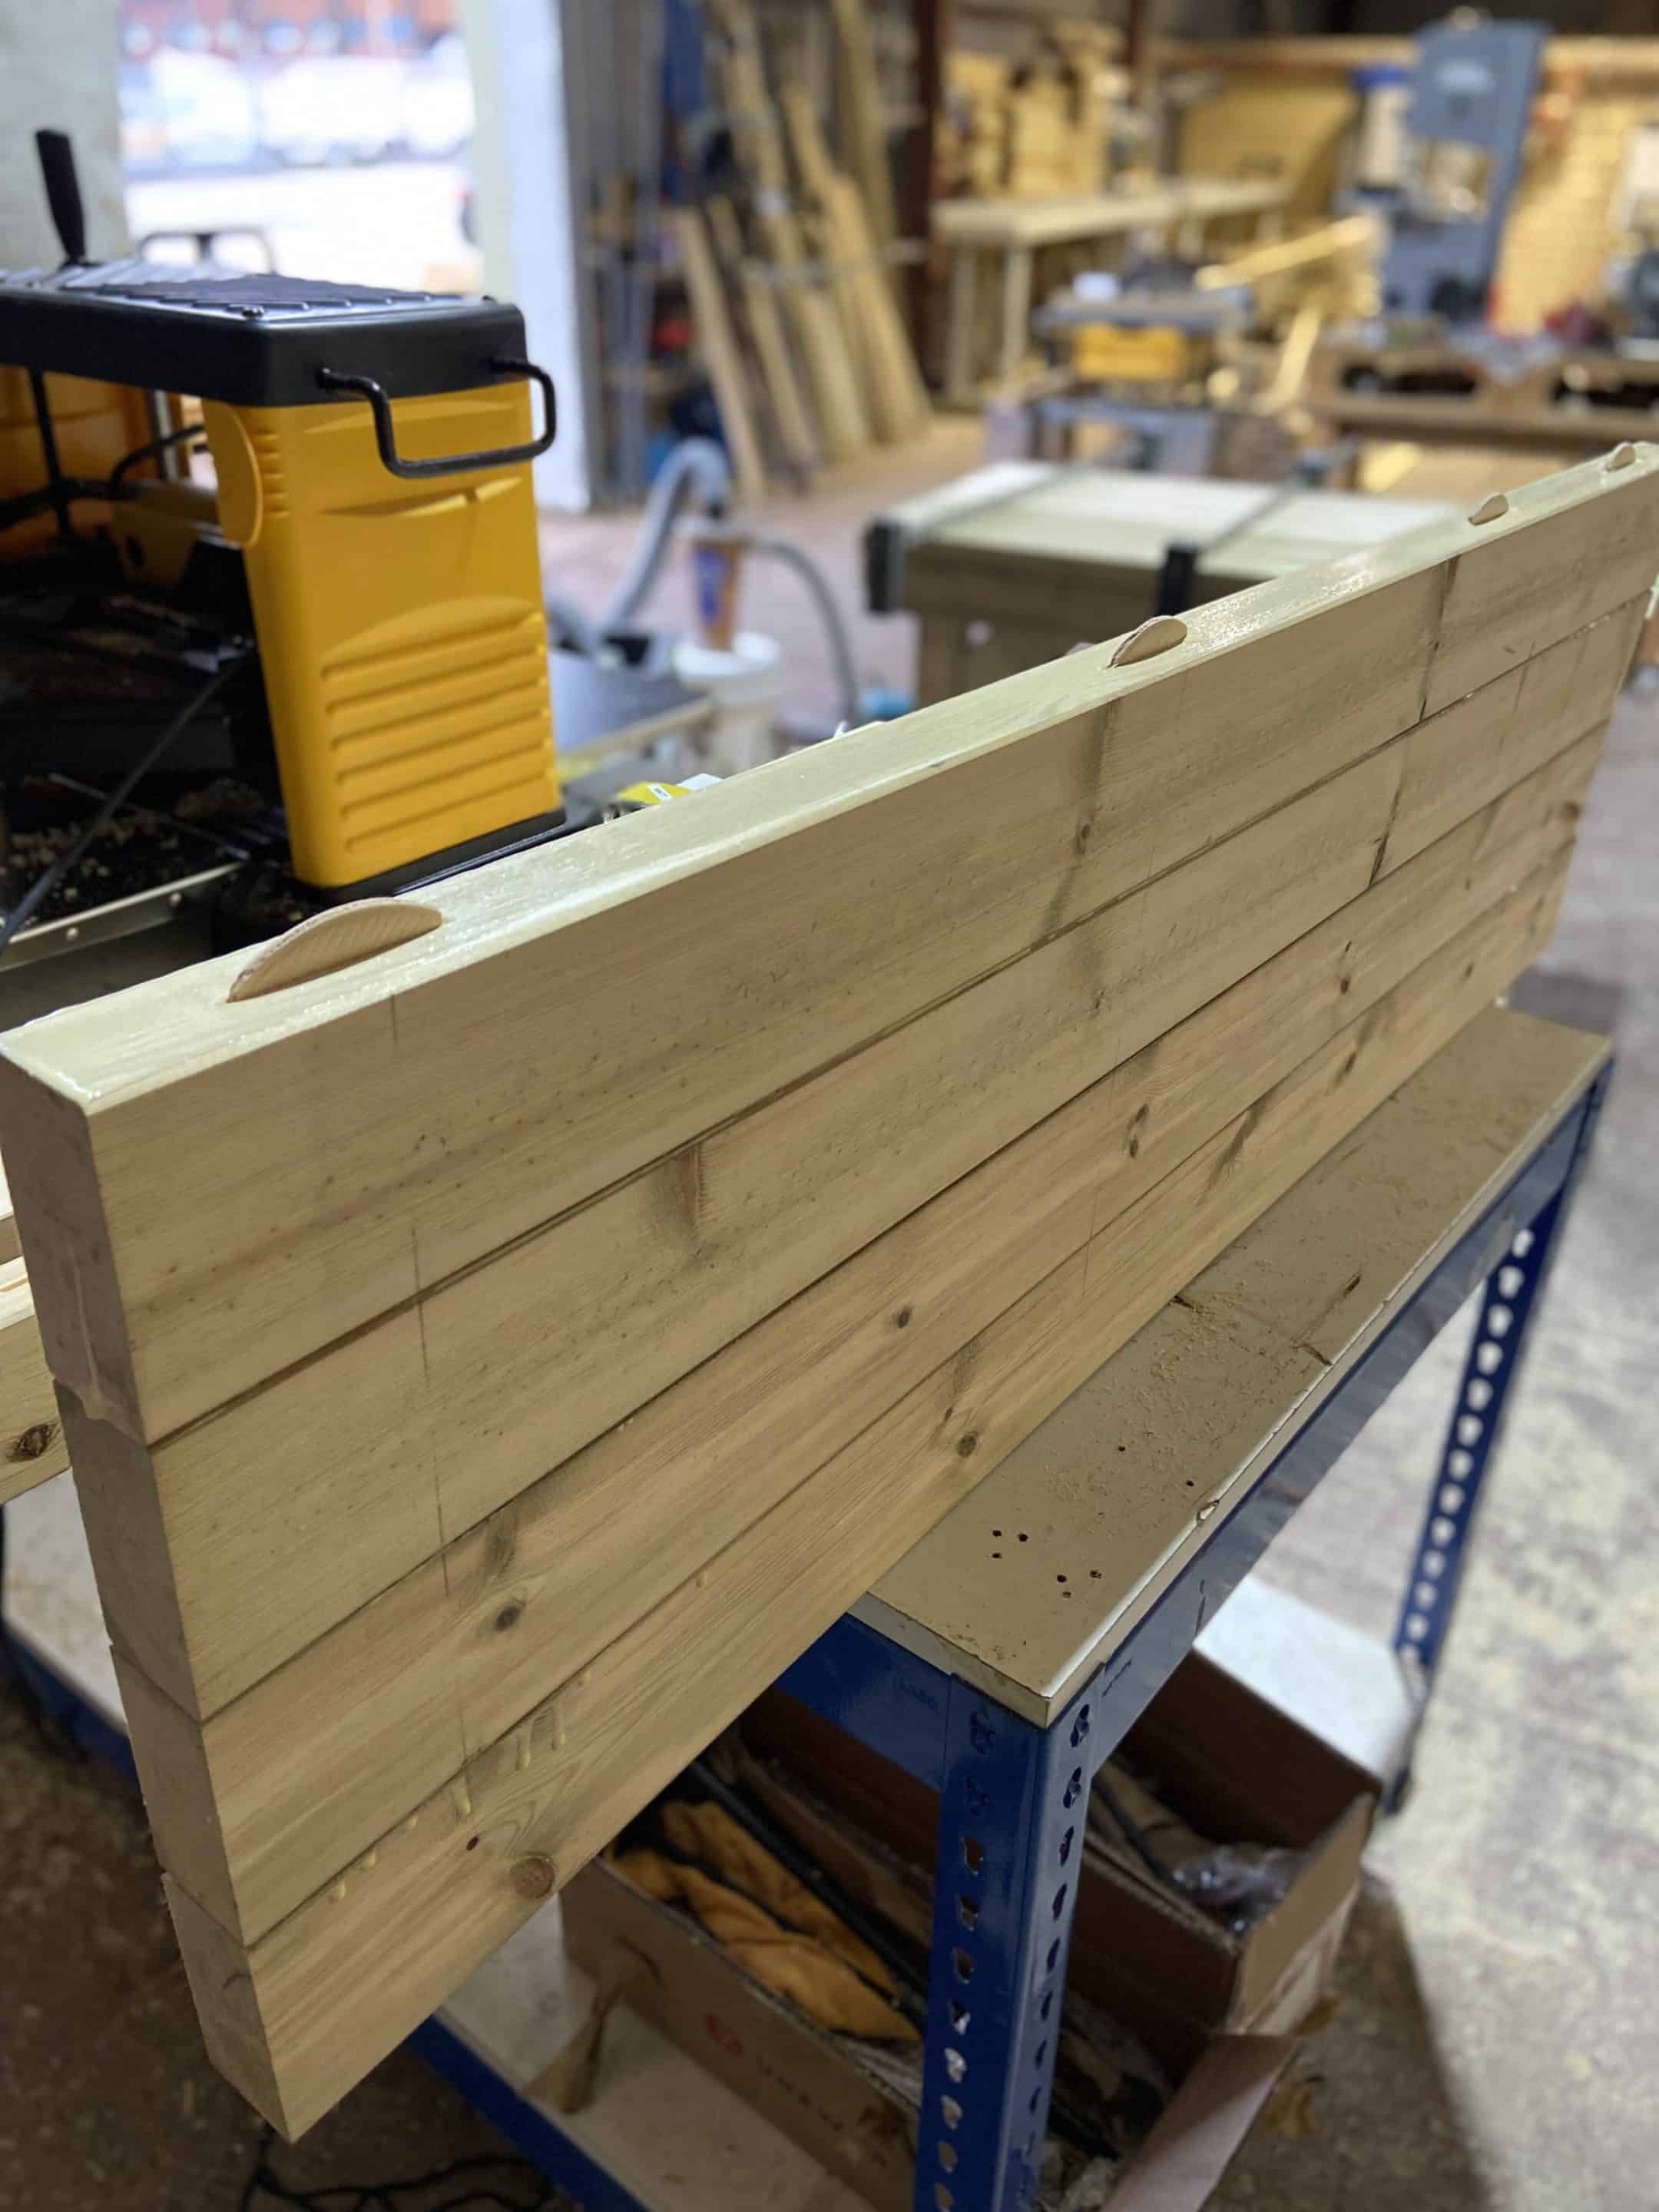 Wooden Workbench Being Constructed